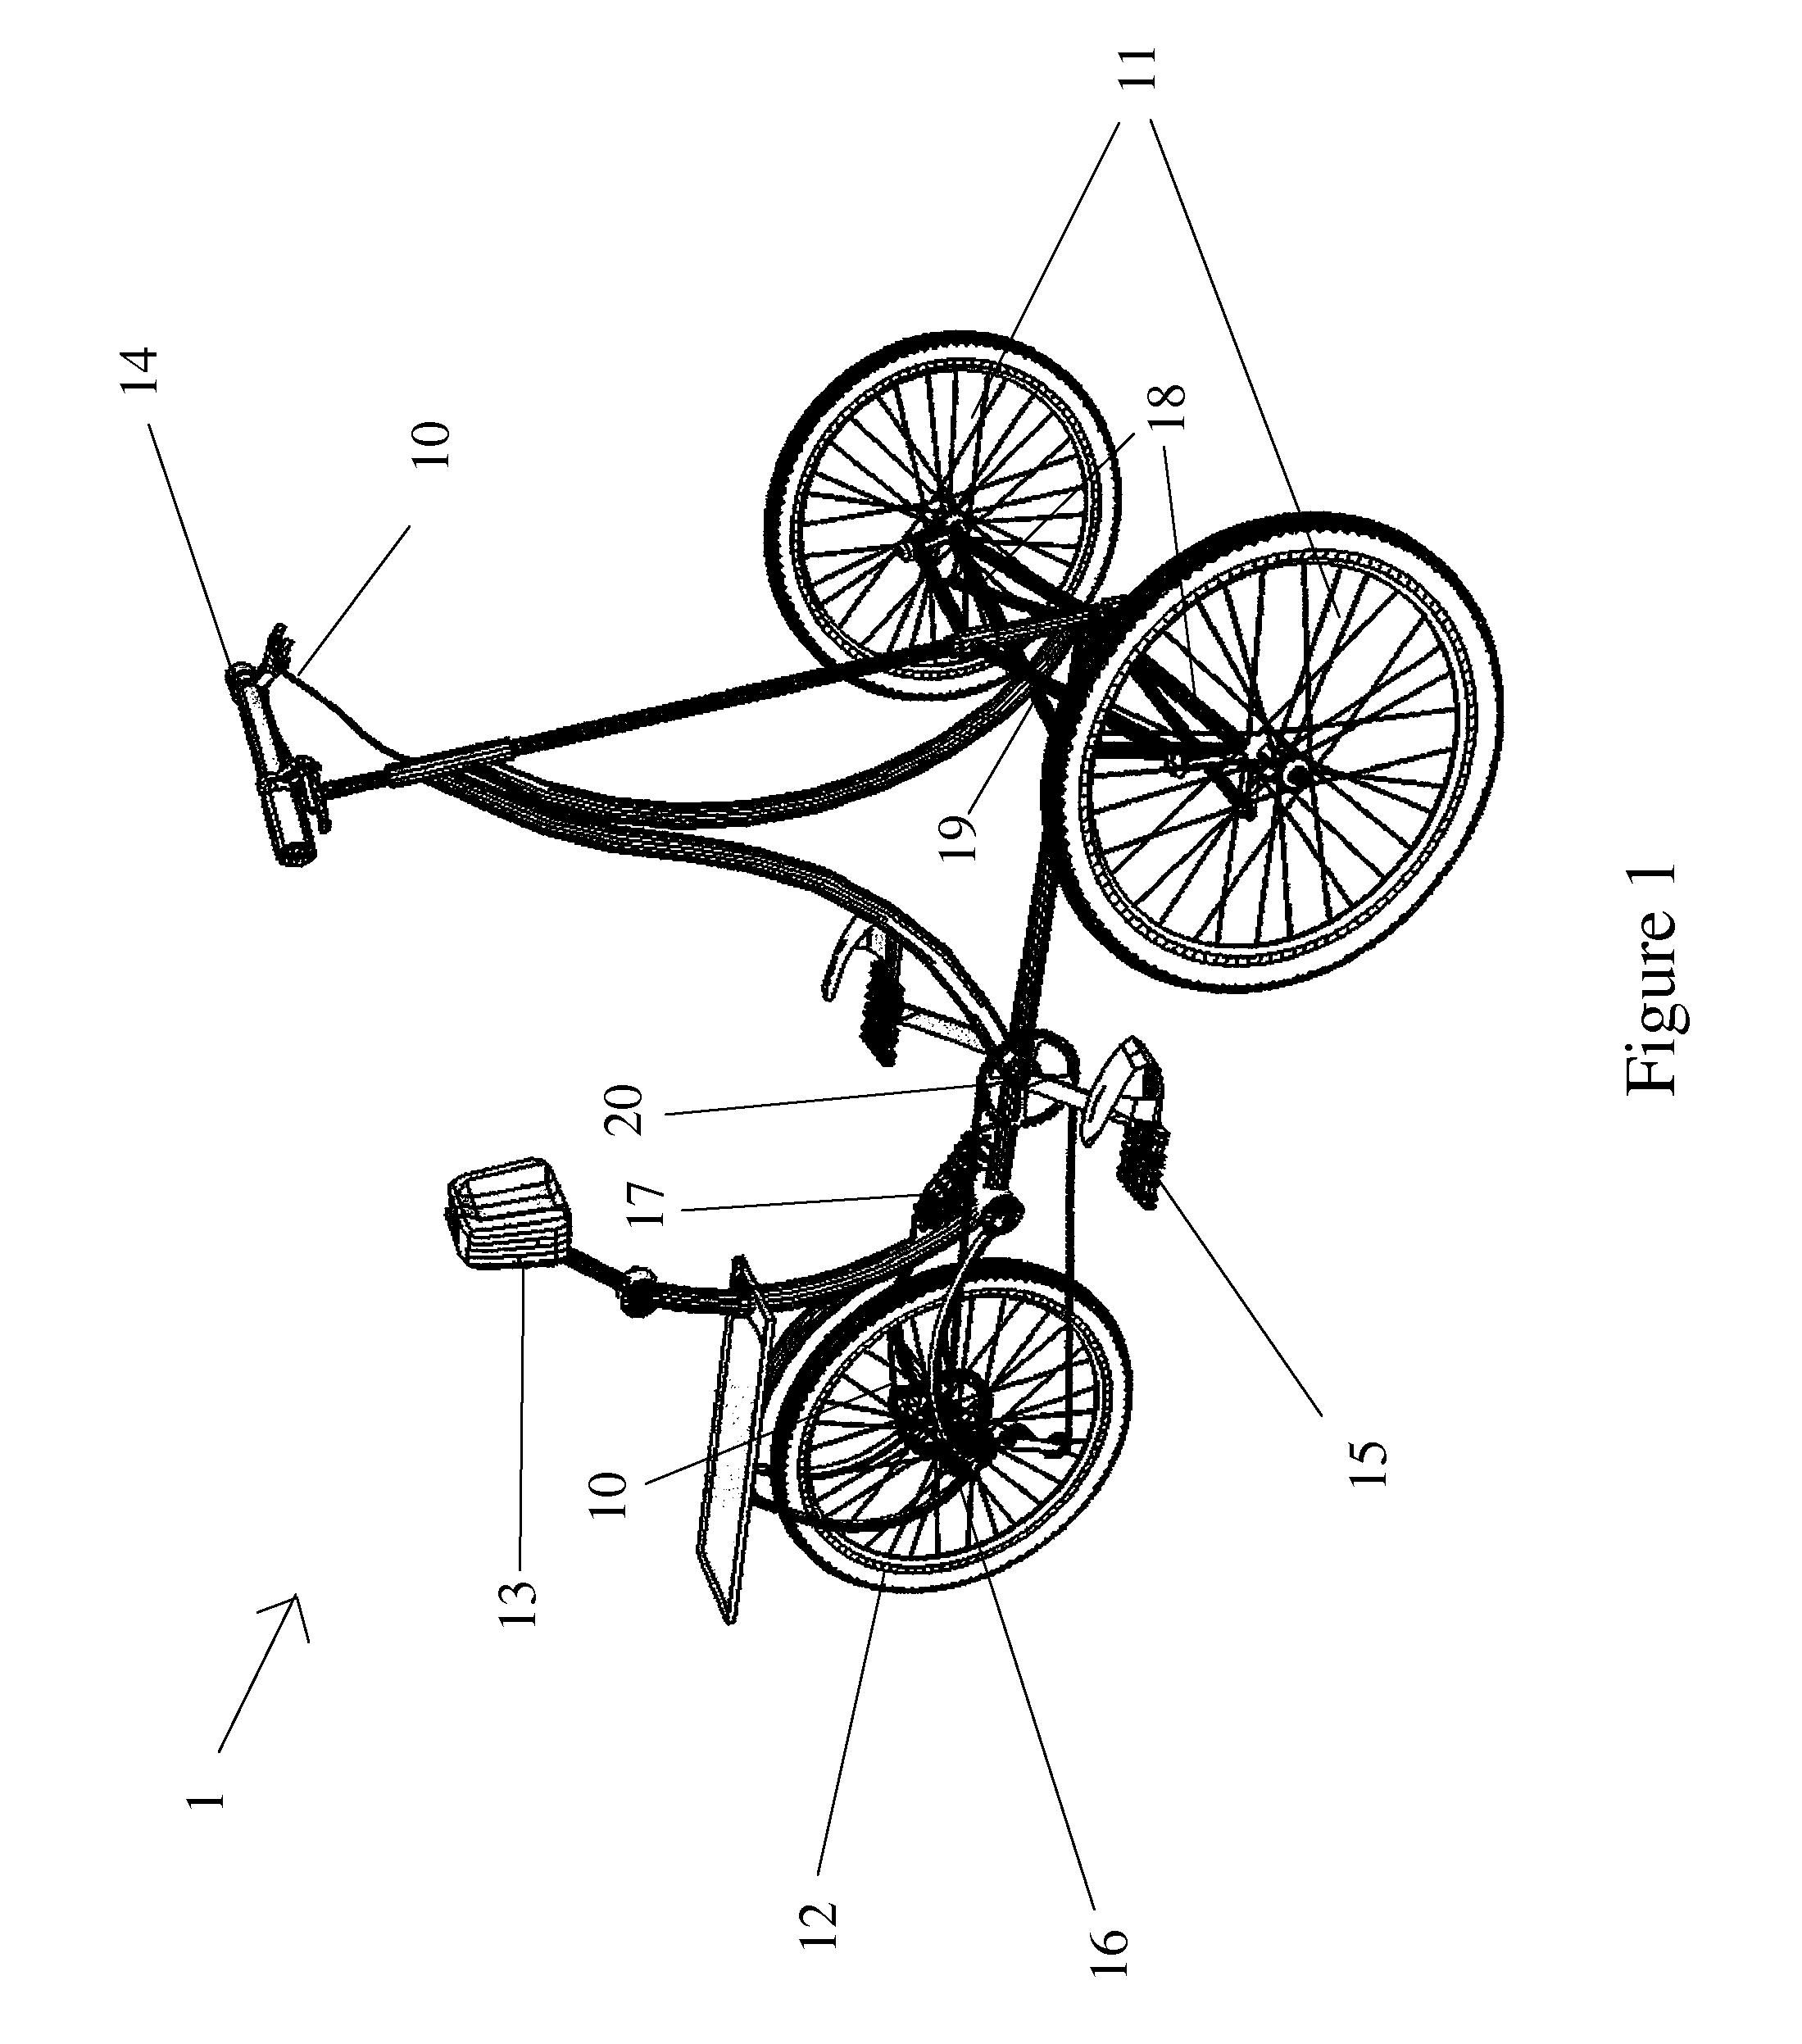 Mobile ergonomic exercise tricycle apparatus and method